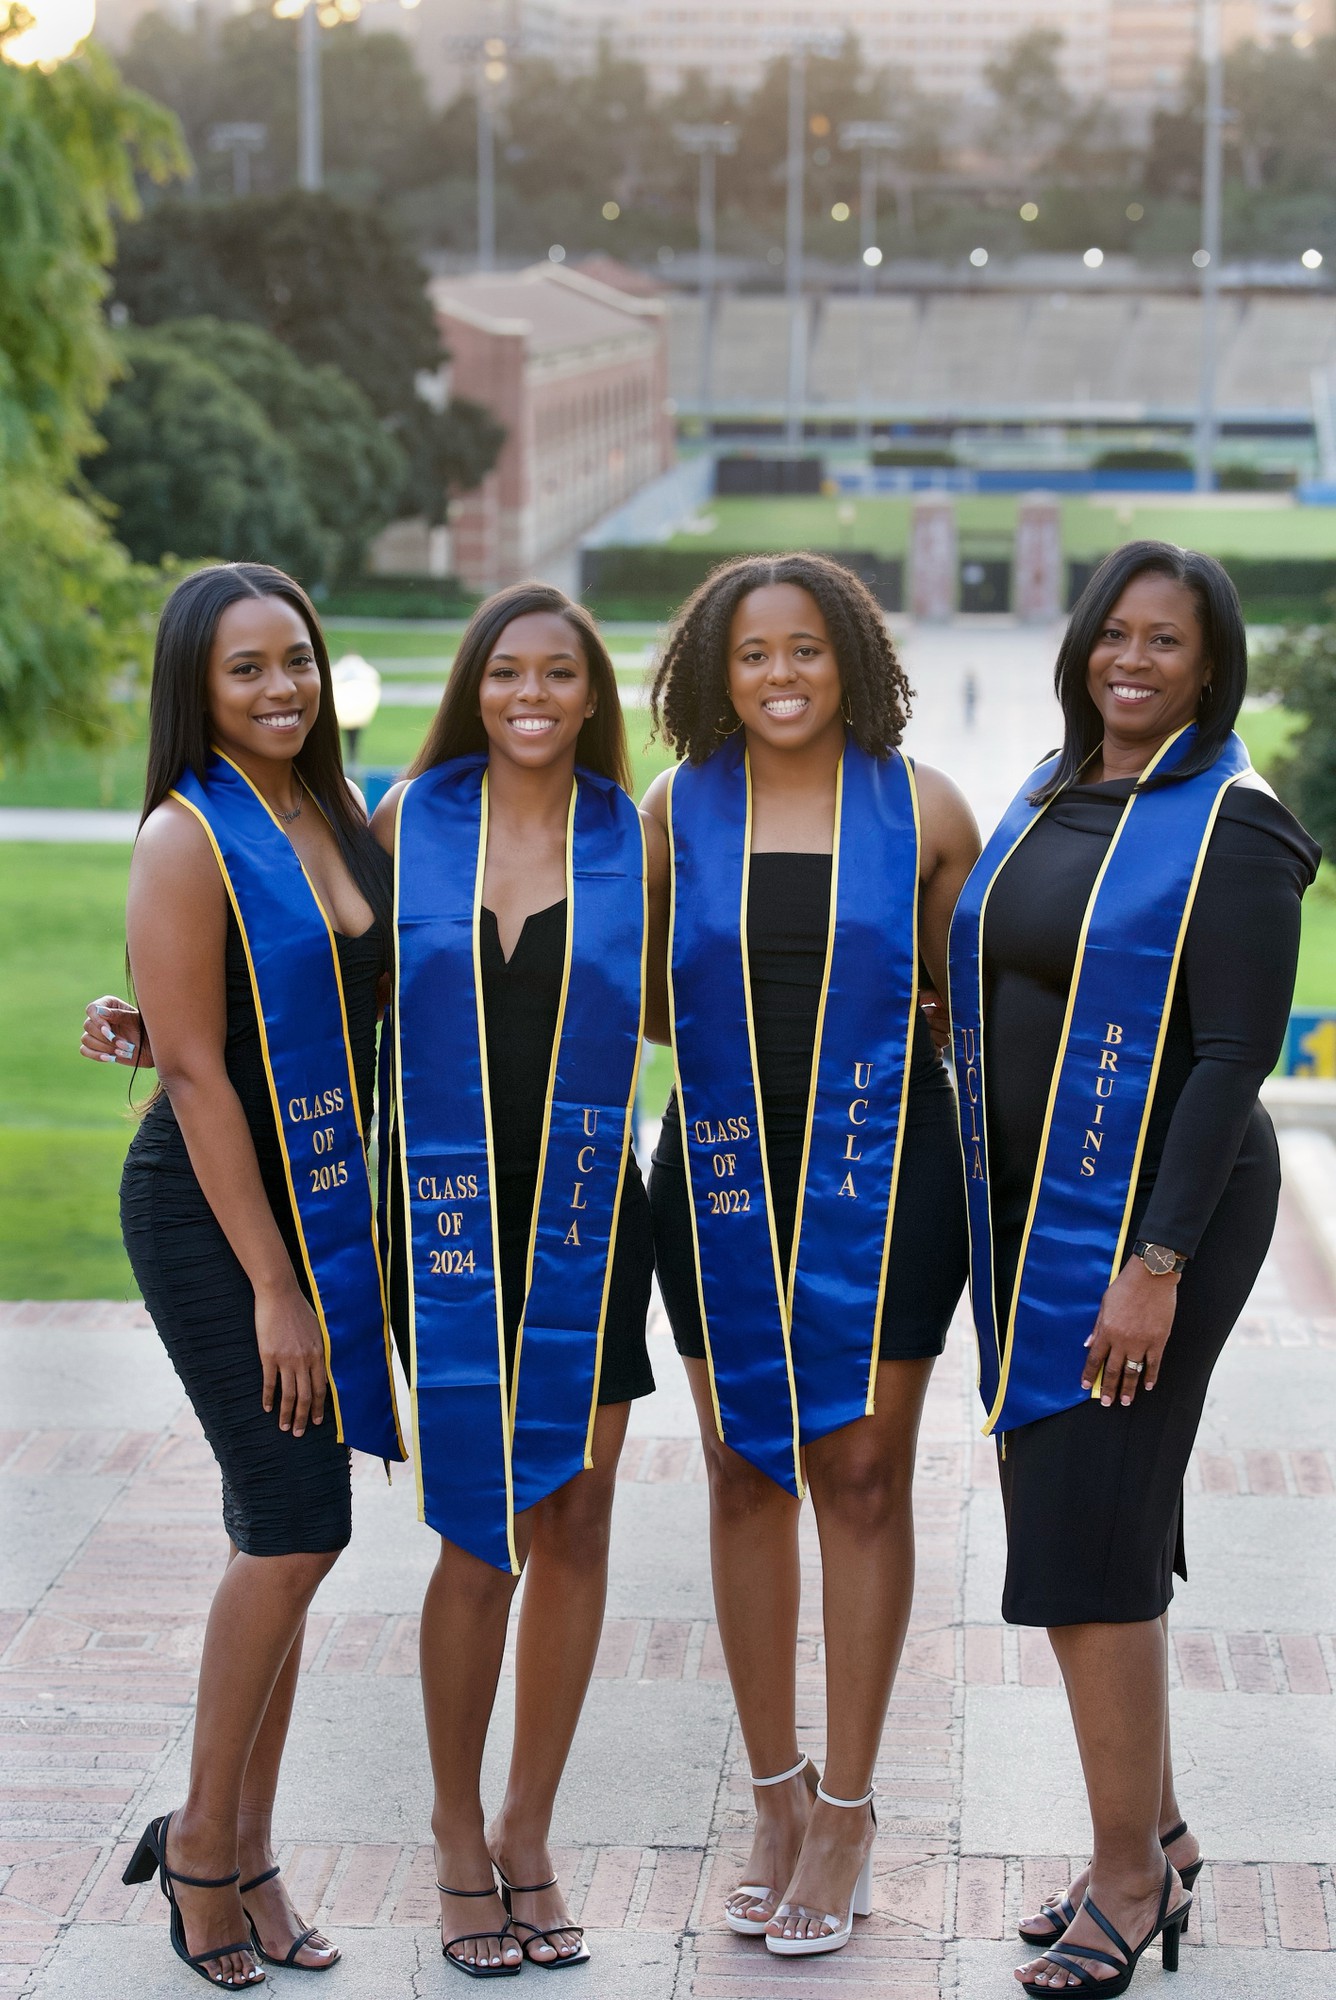 From left to right: Briana Savage, Jazmin Choyce, Ashley Choyce and Tina Choyce standing on Janss Steps. (Courtesy of Briana Savage)